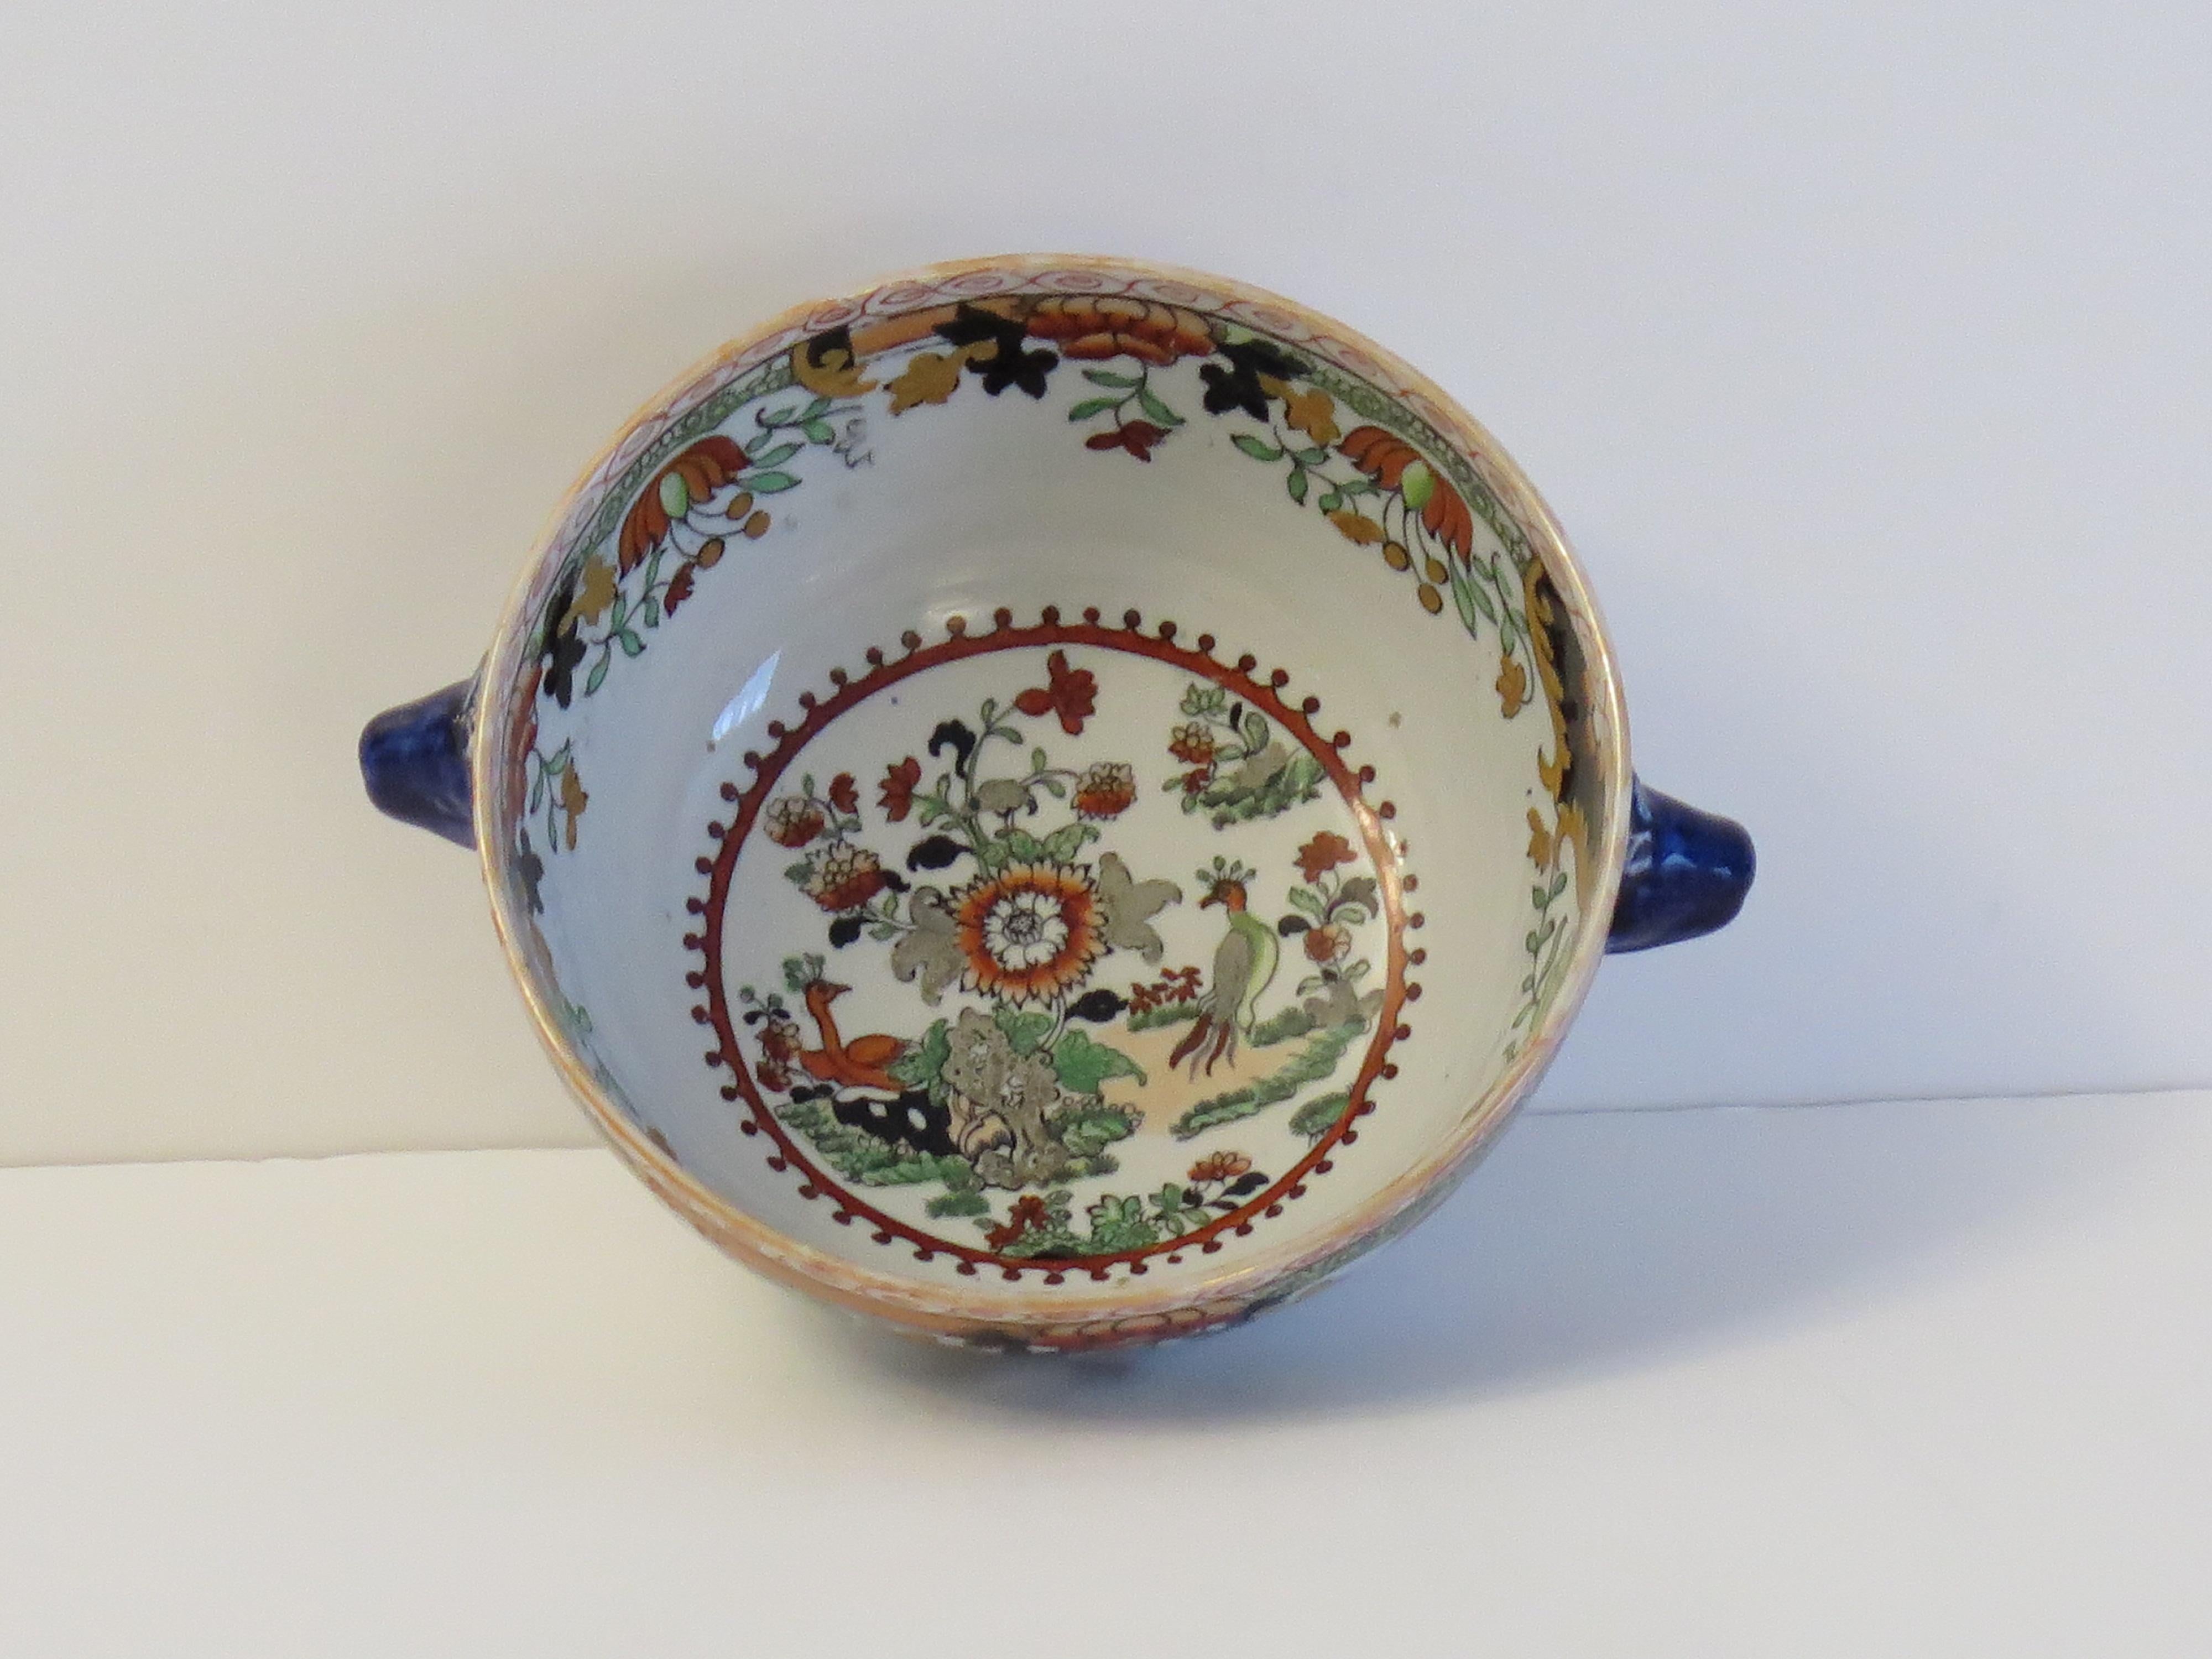 Masons Ironstone Bowl in Peacock Peony & Rock hand painted Pattern, circa 1838 For Sale 3